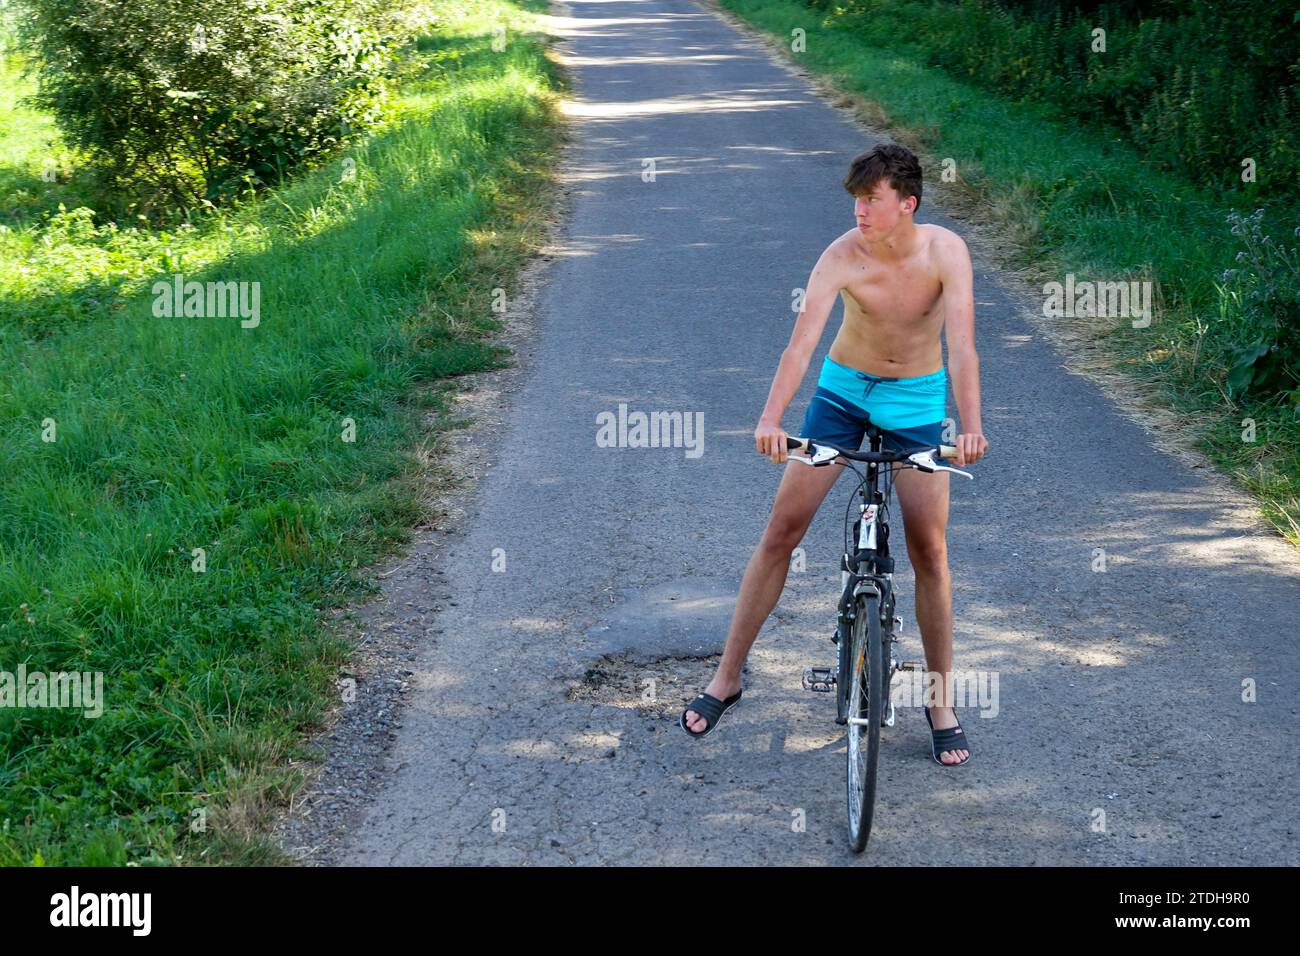 young man alone 20s on a bicycle on a rural road, summer, only in shorts riding bike without helmet, hot weather Stock Photo